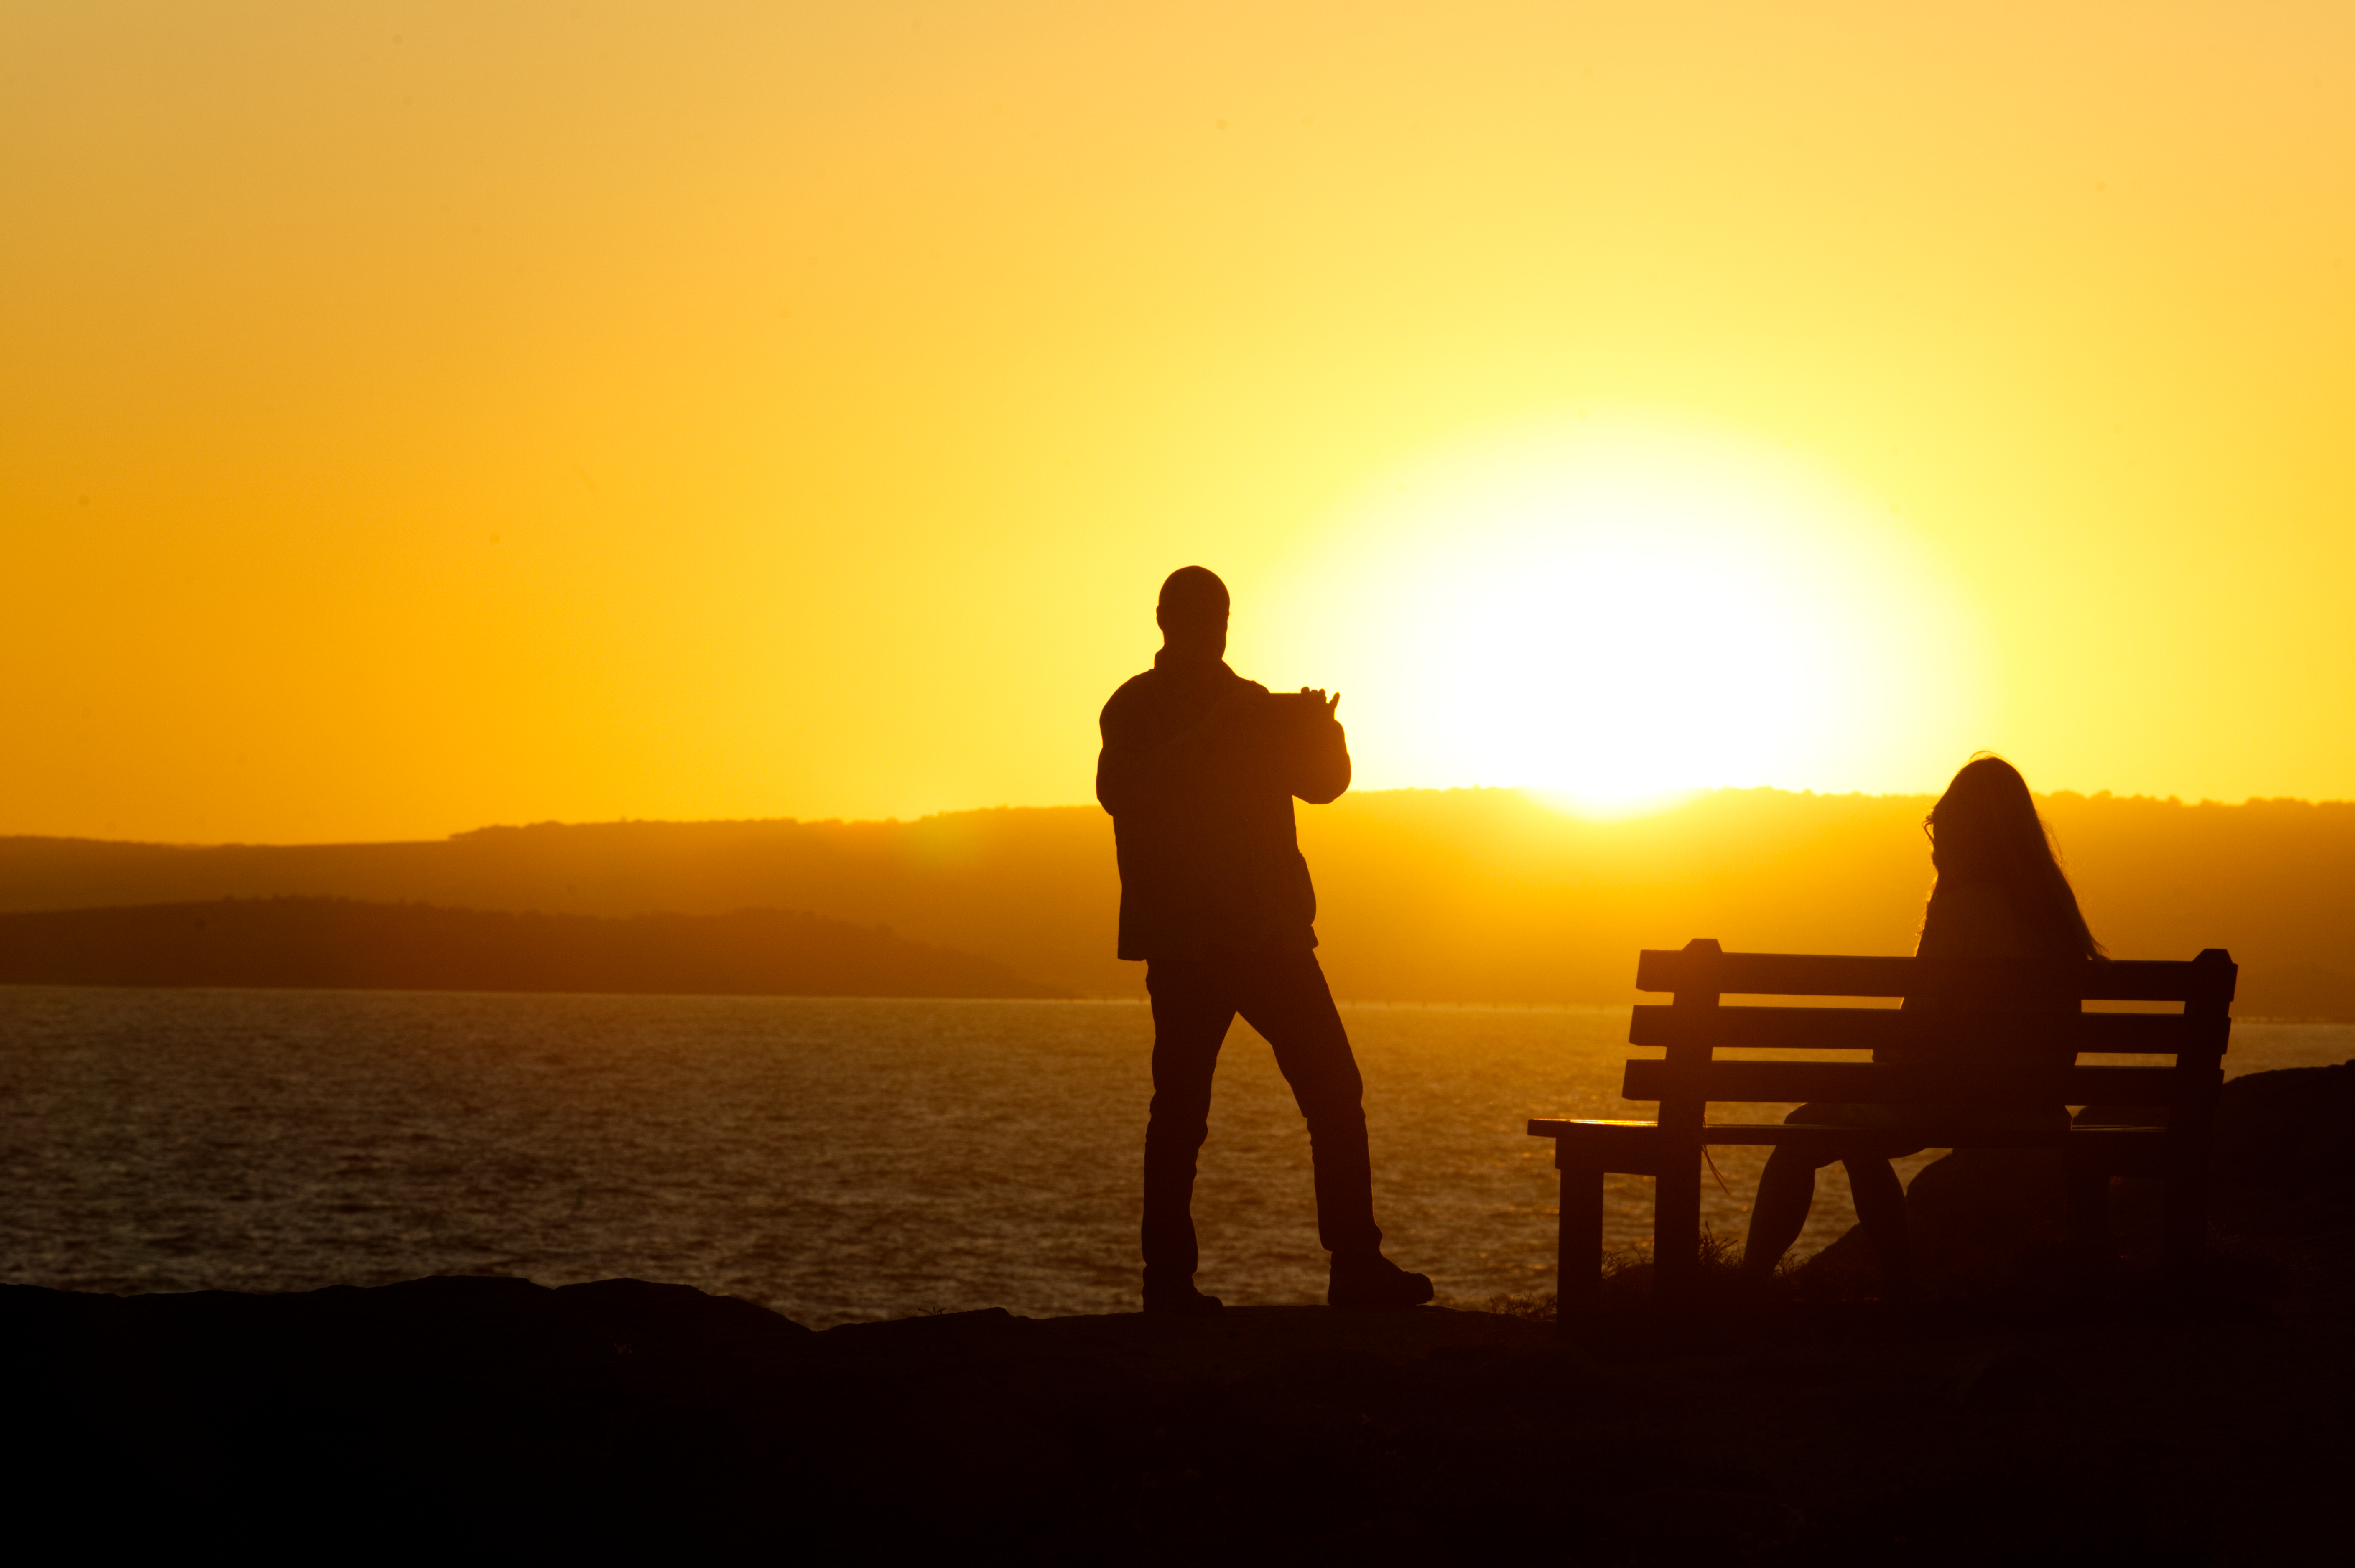 Silhouette with golden setting sun of man taking a photo of a woman on a park bench.